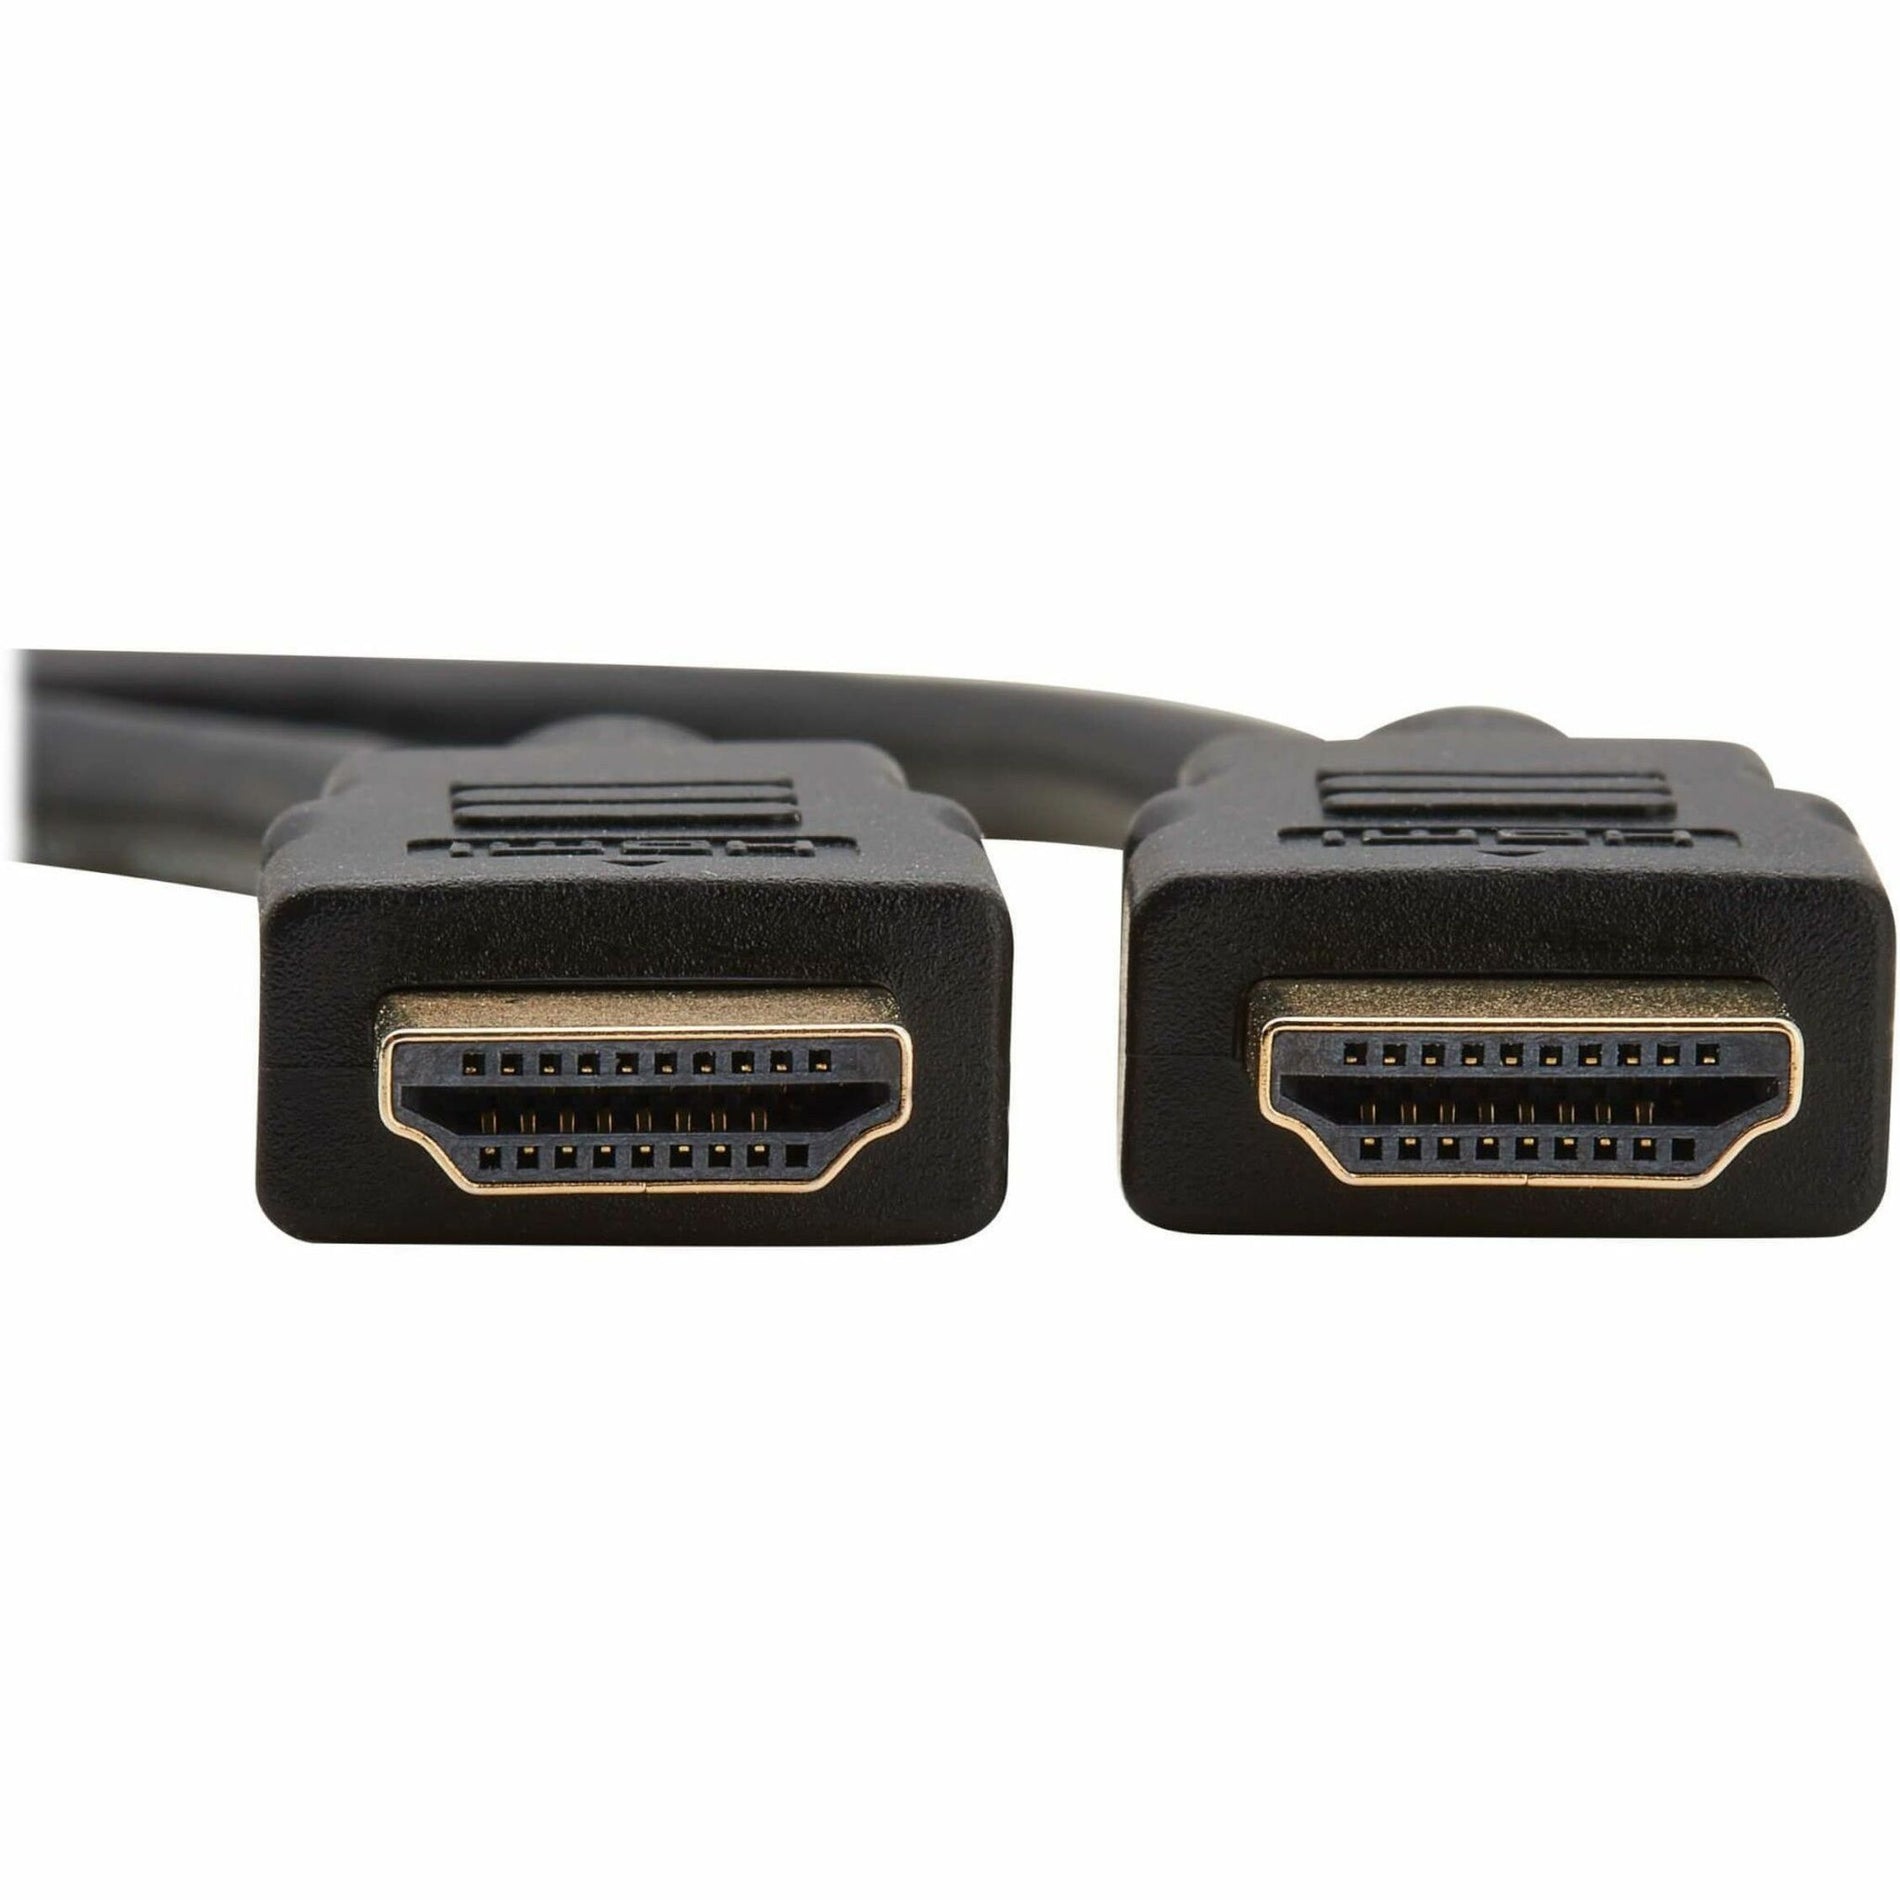 Tripp Lite P568-050 HDMI Gold Digital Video Cable, 50ft, High-Quality Connection for Digital Displays